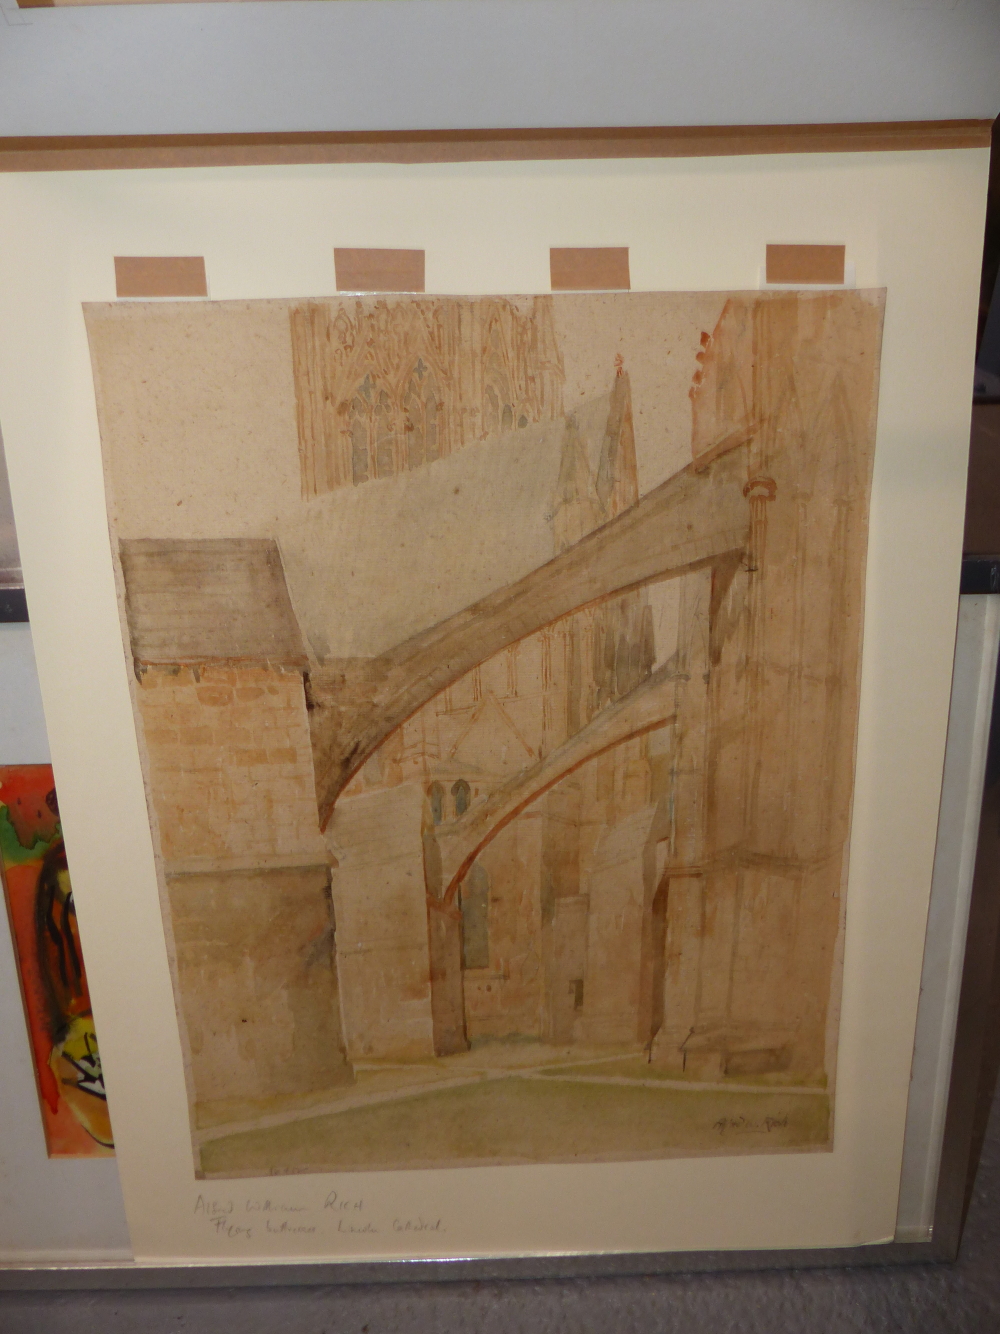 ALFRED WILLIAM RICH N.E.A.C. (1856-1921), FLYING BUTTRESSES AT LINCOLN CATHEDRAL, SIGNED, - Image 4 of 5